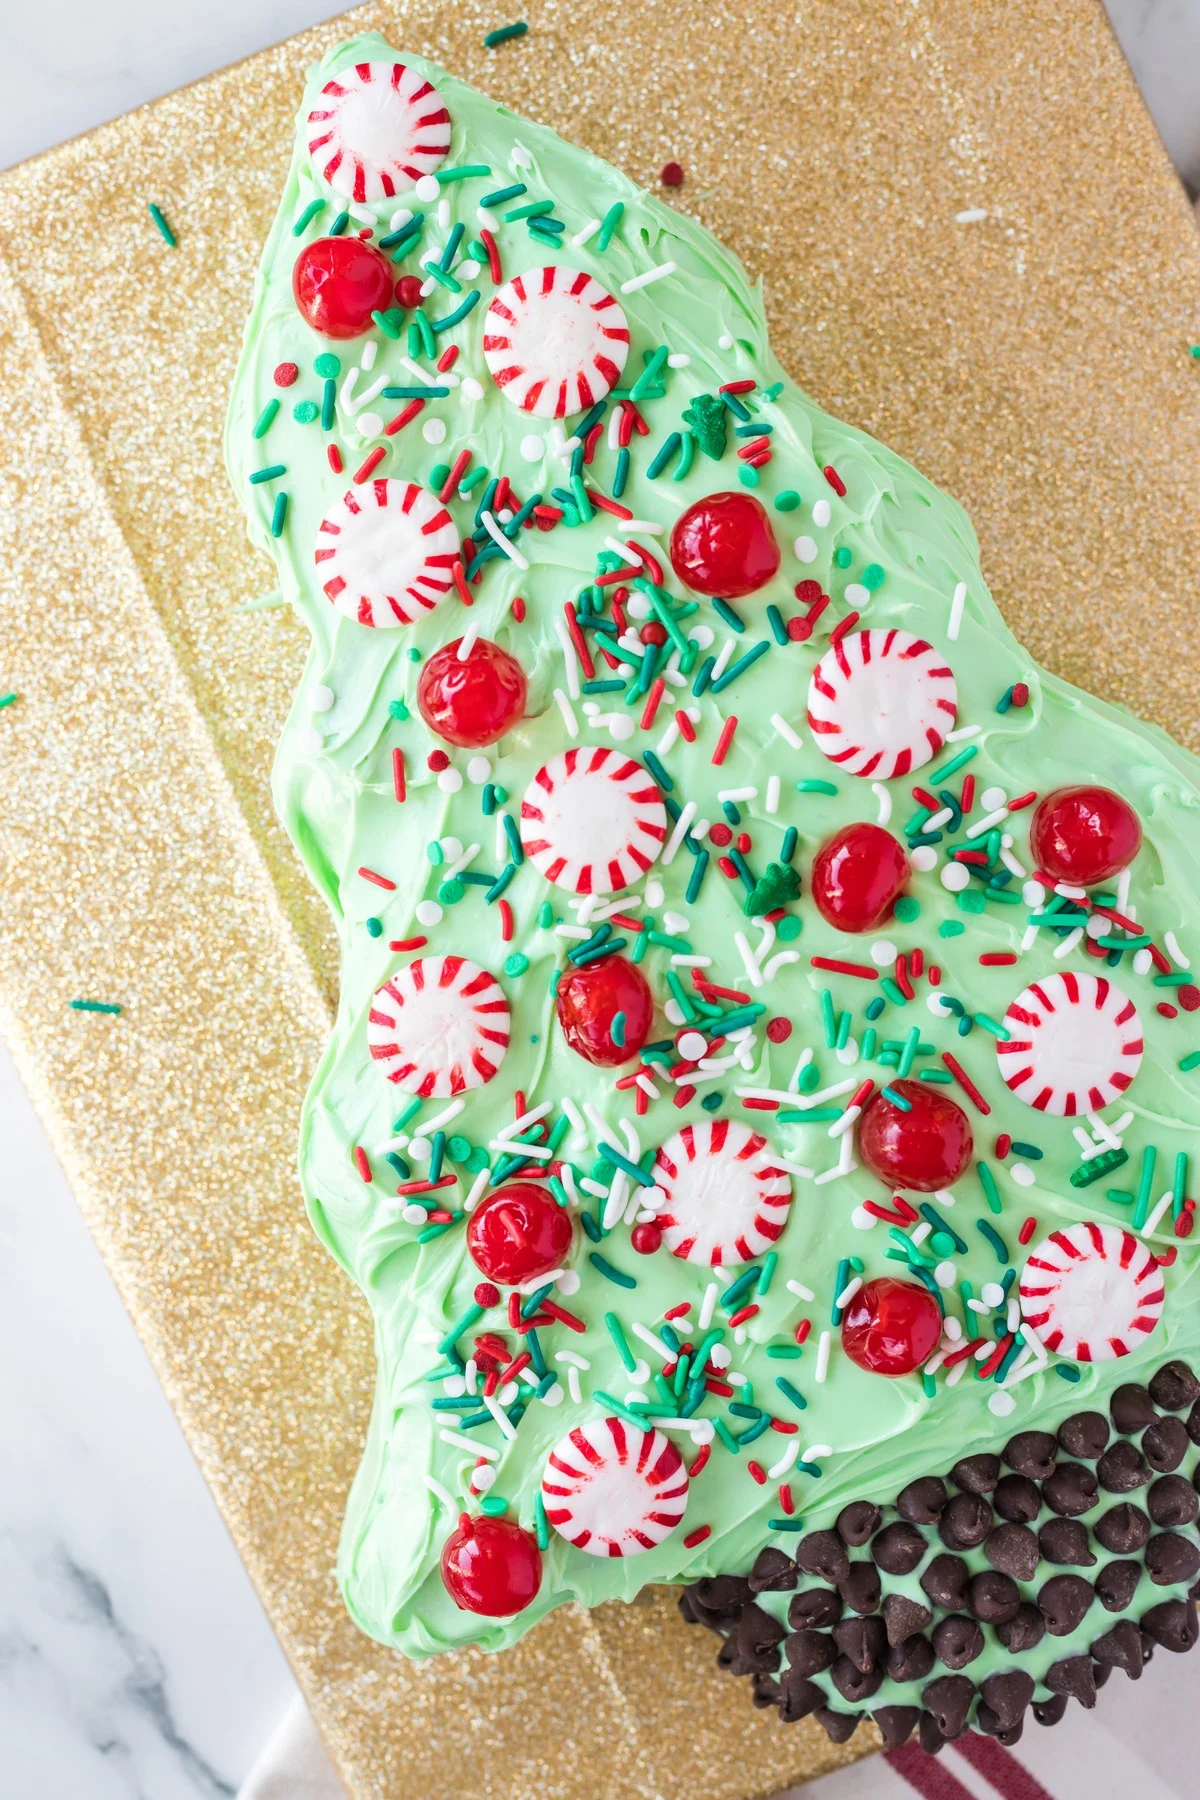 Easy Christmas Tree Cake Decorating Idea • Recipe for Perfection